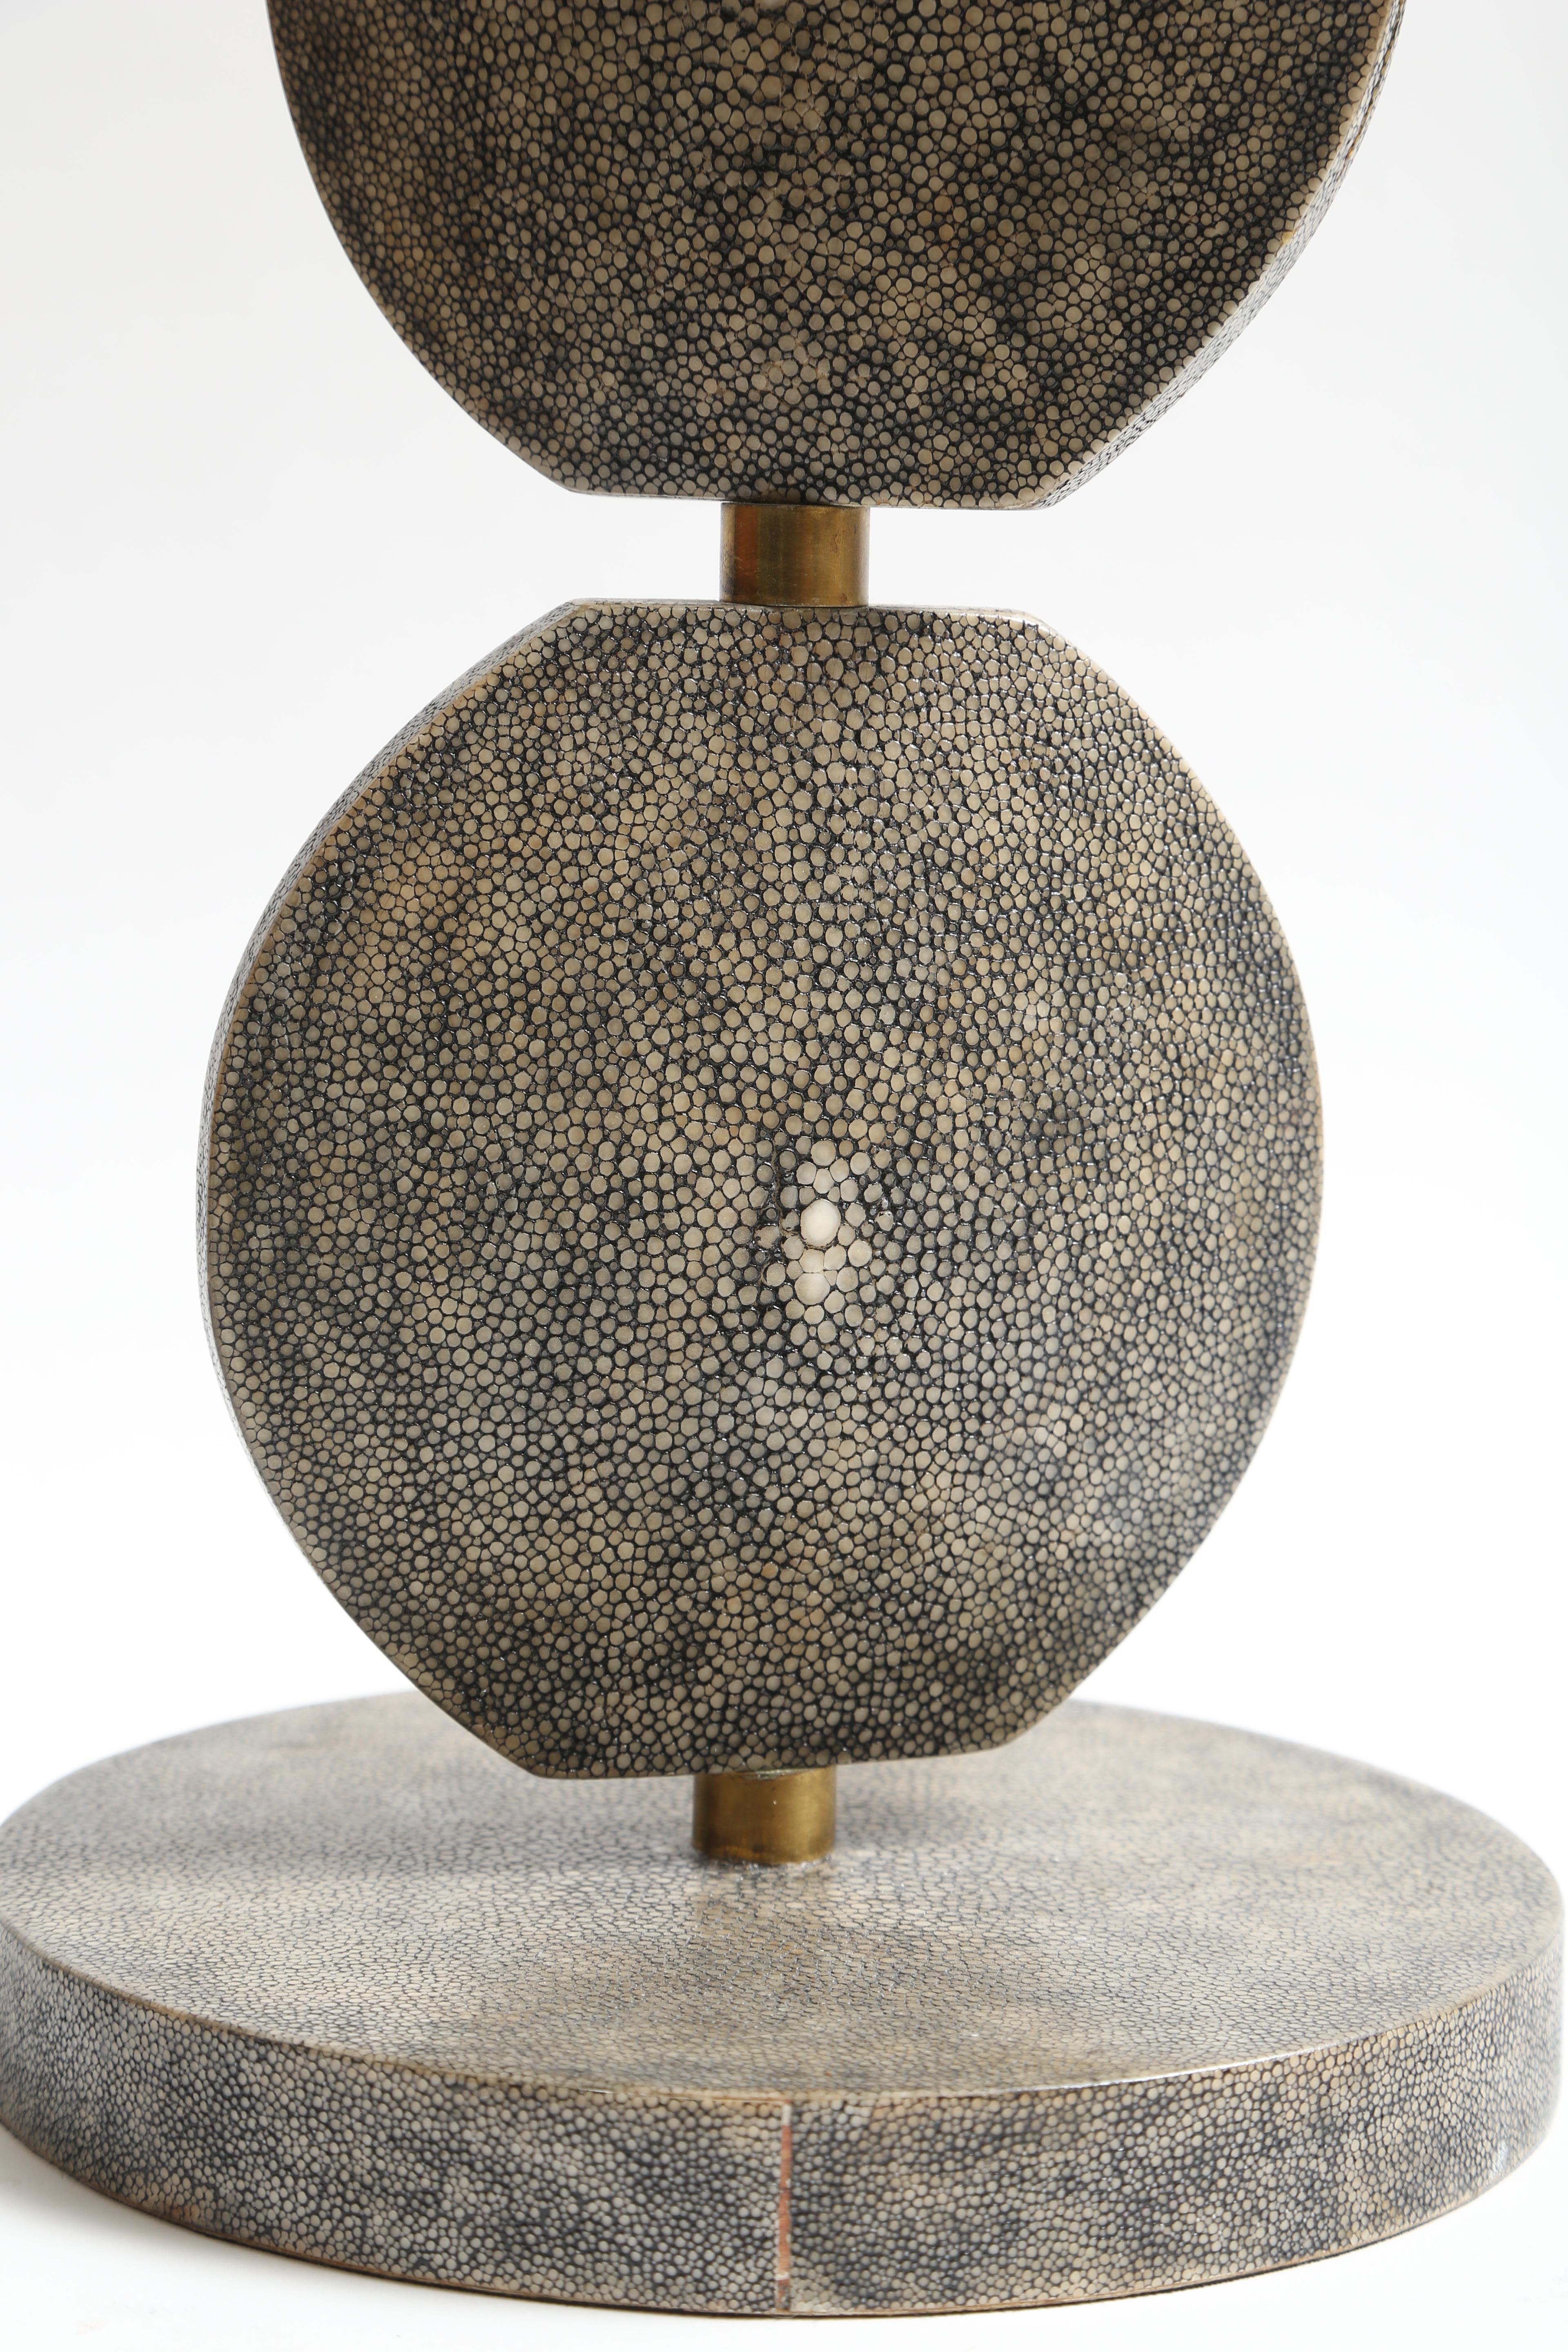 A fine example of R and Y Augousti.
The disks can be manipulated 365 Degrees.
Another Augousti lamp in Lizard skin is also listed.